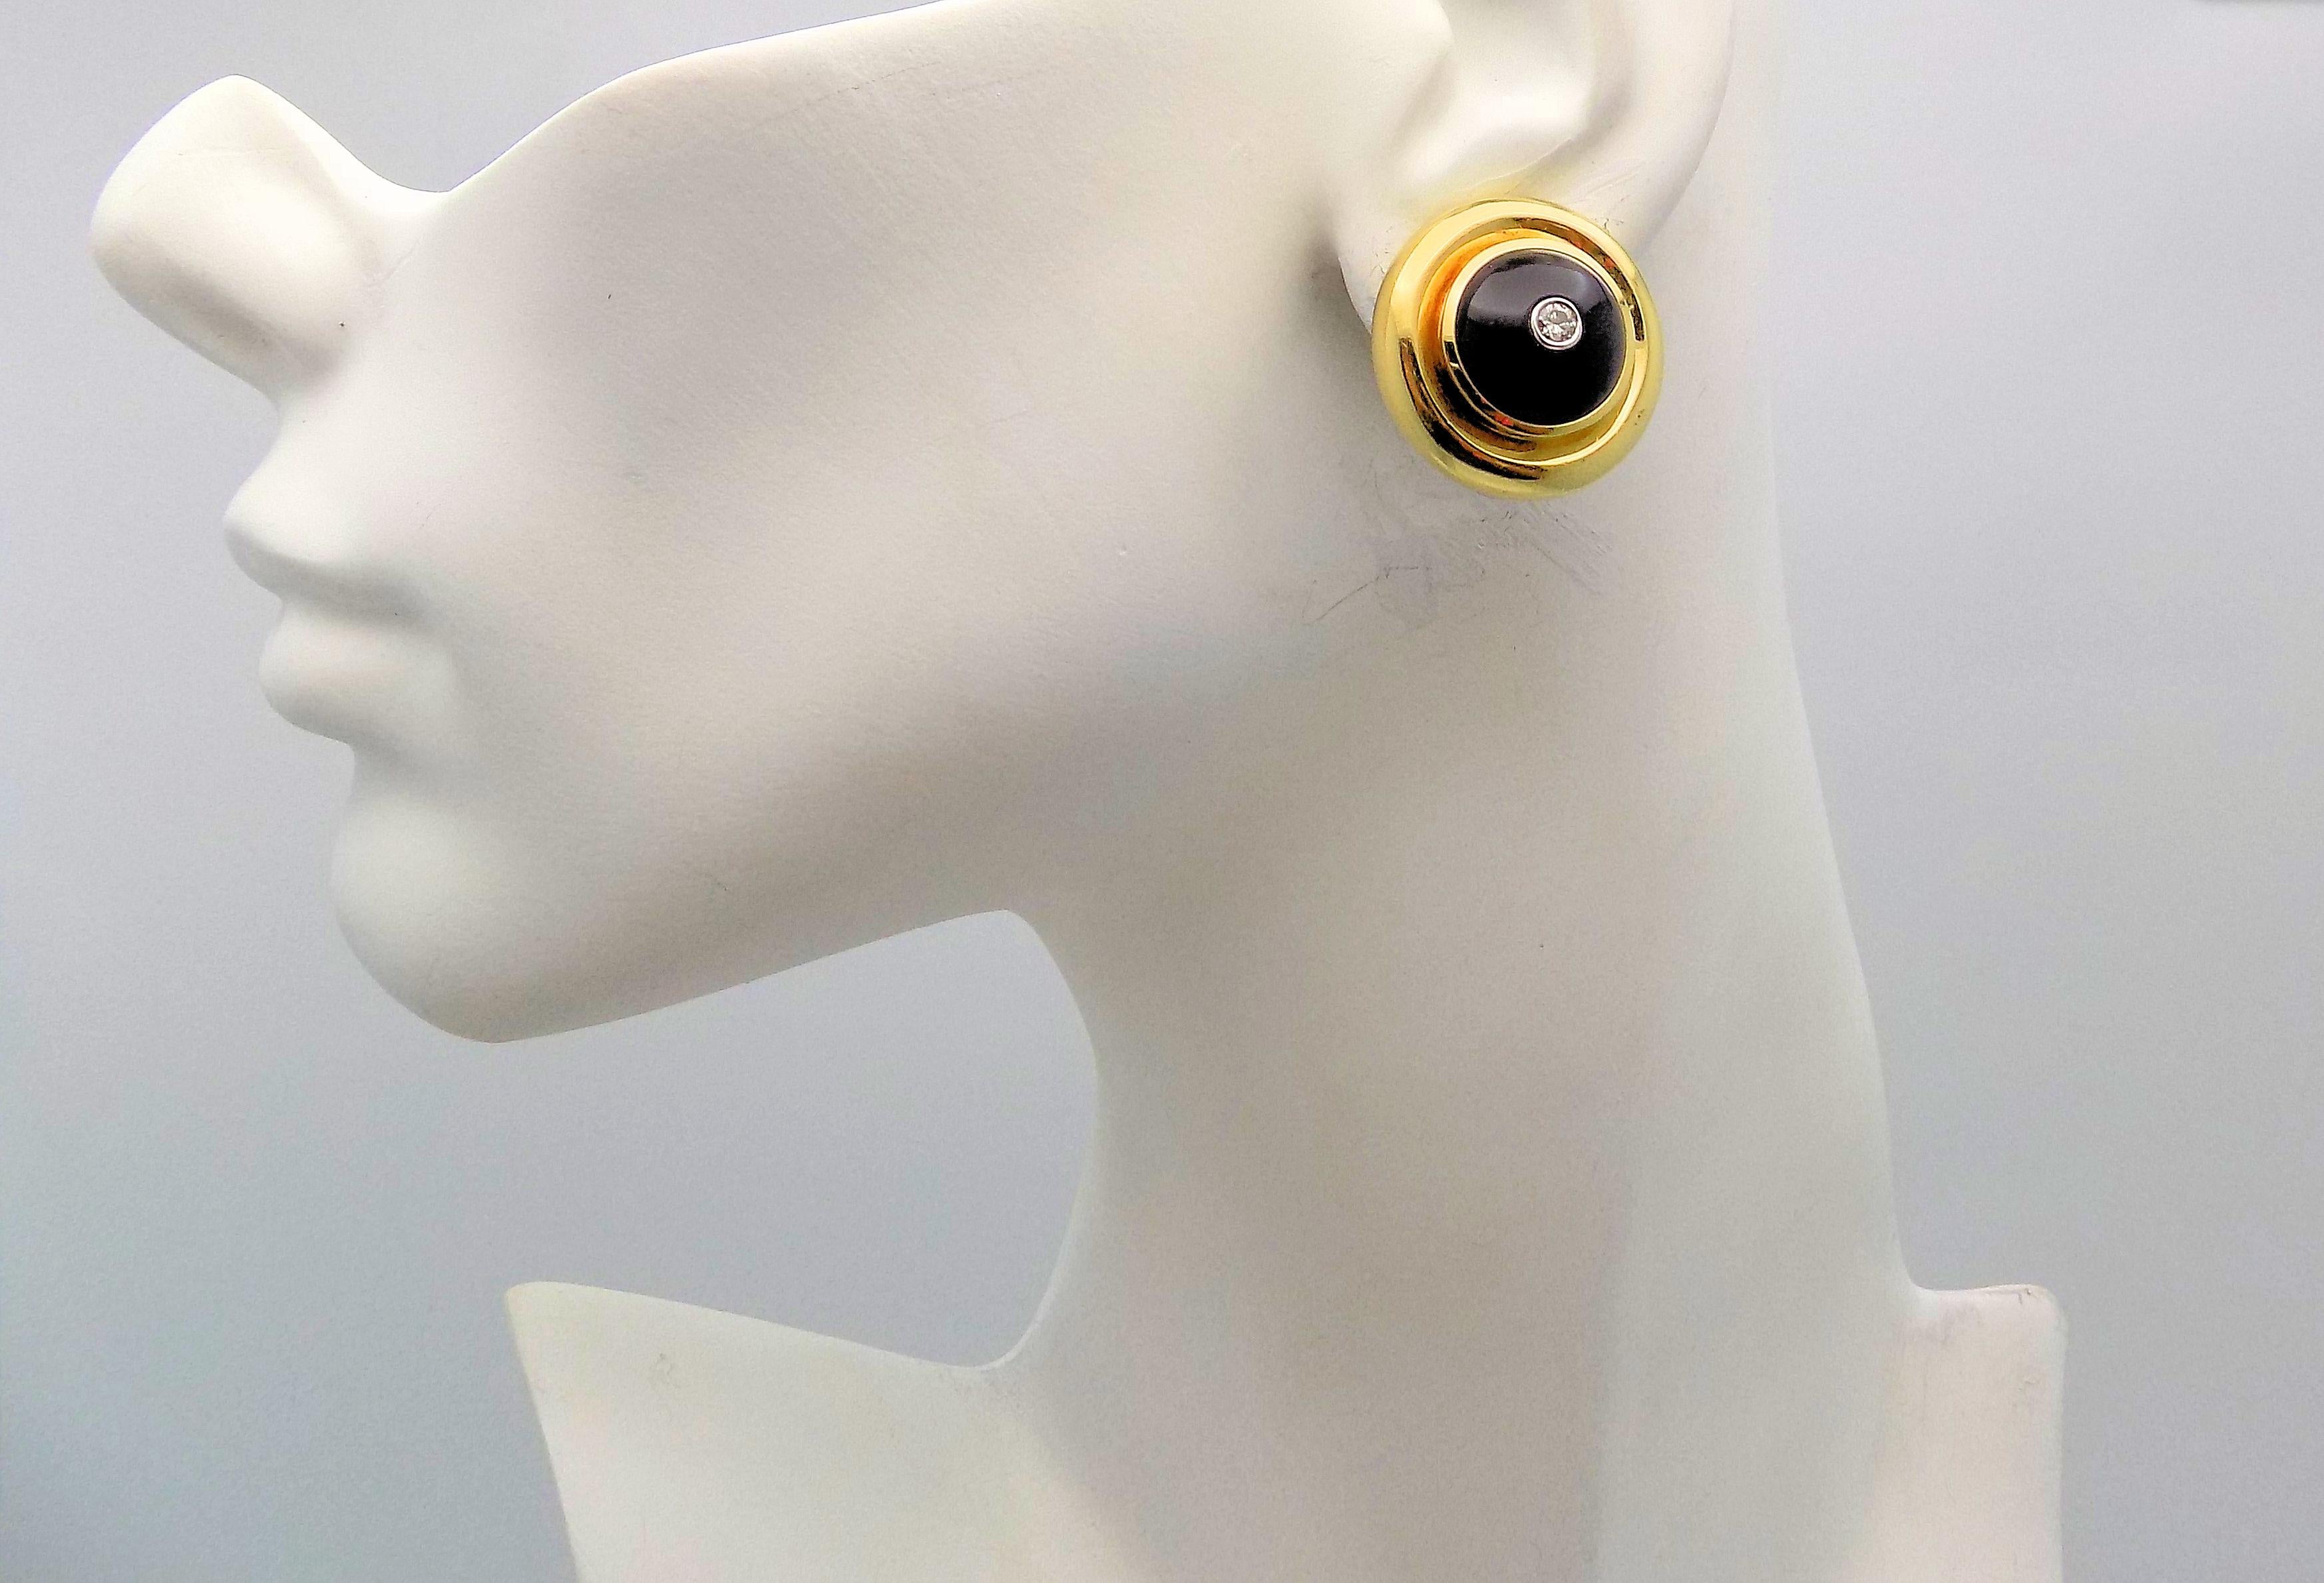 Classic Pair 18 Karat Yellow Gold and White Gold Clip Earrings featuring Two 13 MM Round Cabochon Cut Black Onyx; Two Round Brilliant Diamonds 0.20 Carat Total Weight, VS, H; Signed: Tiffany & Co Paloma Picasso 1980 (with Box) 16.6 DWT or 25.82